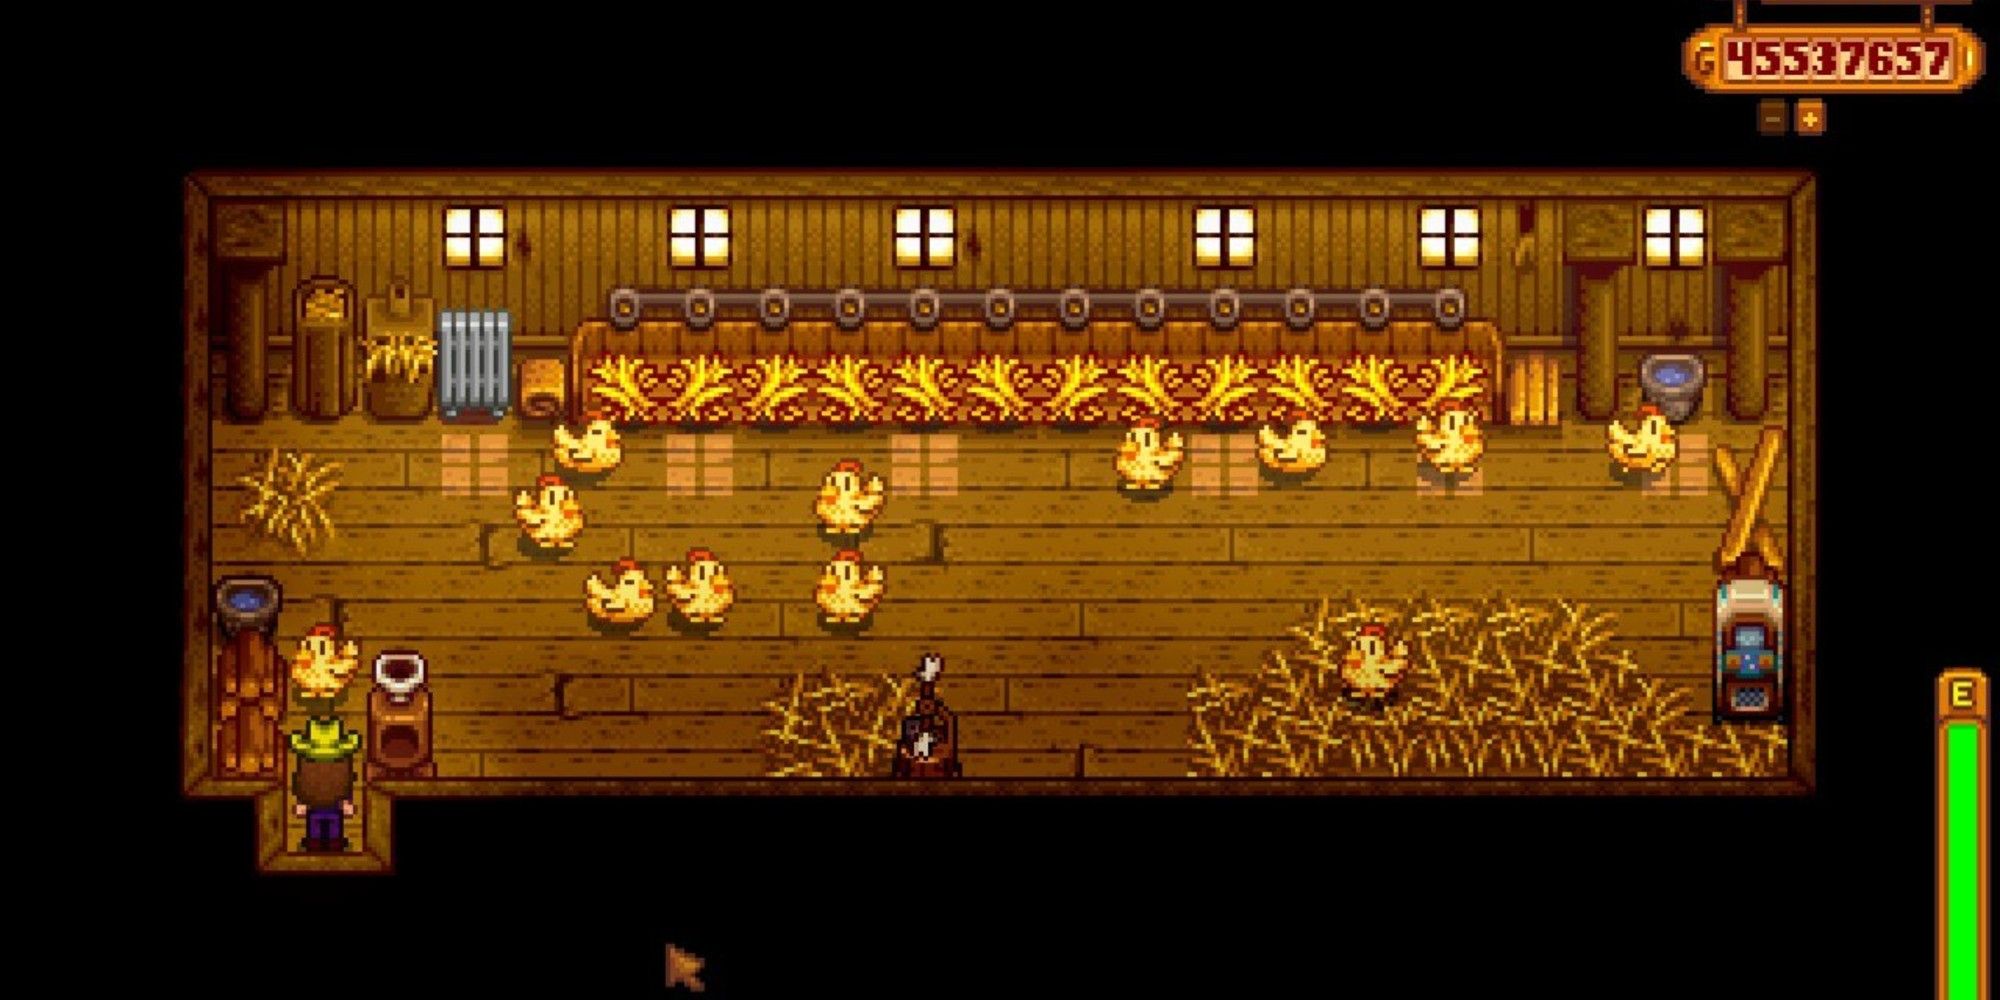 player standing in coop filled with golden chickens